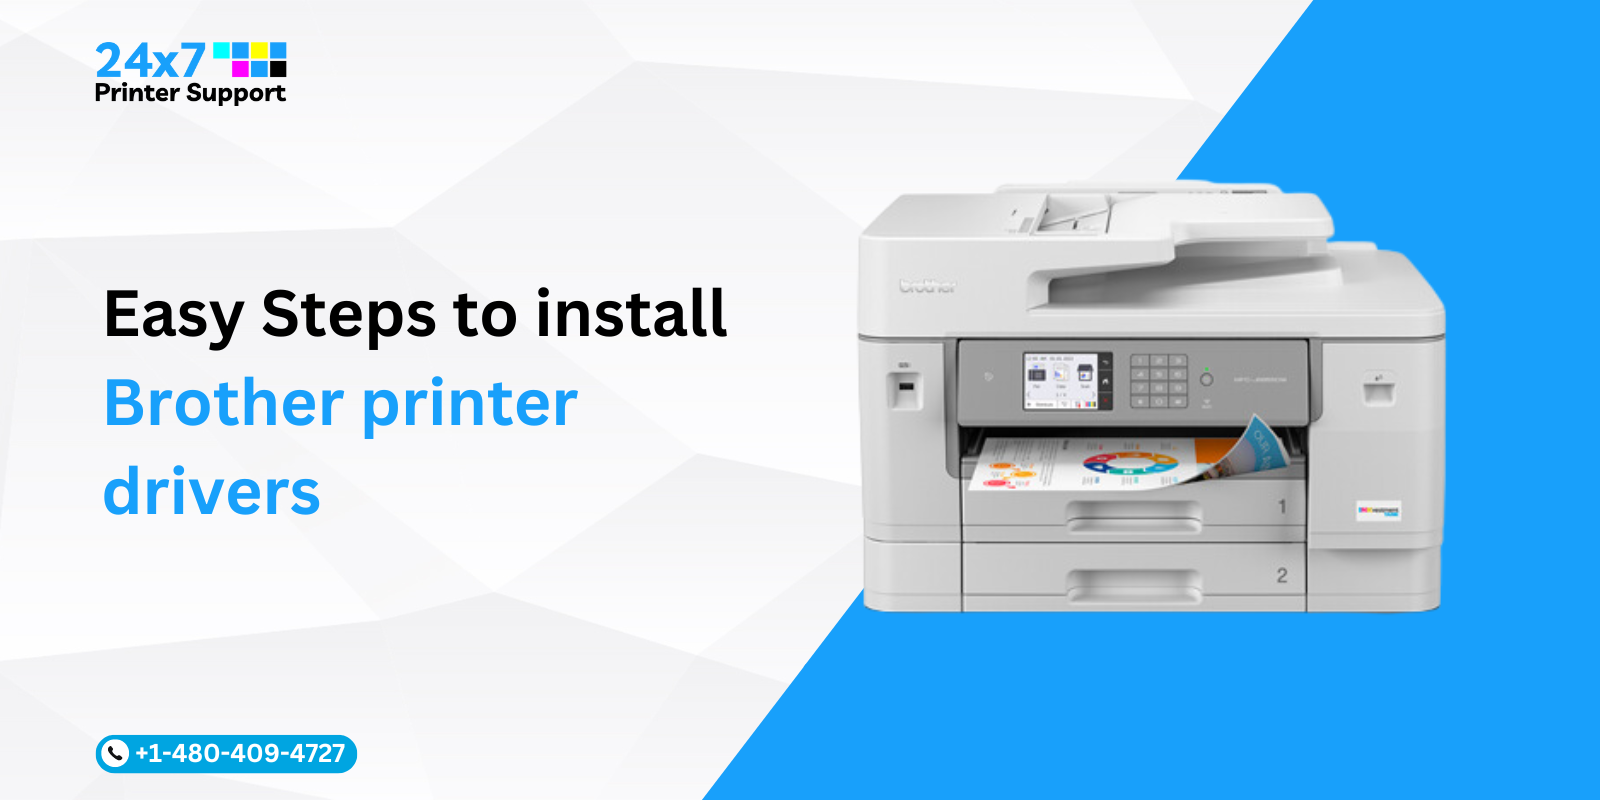 Easy Steps to install Brother printer drivers